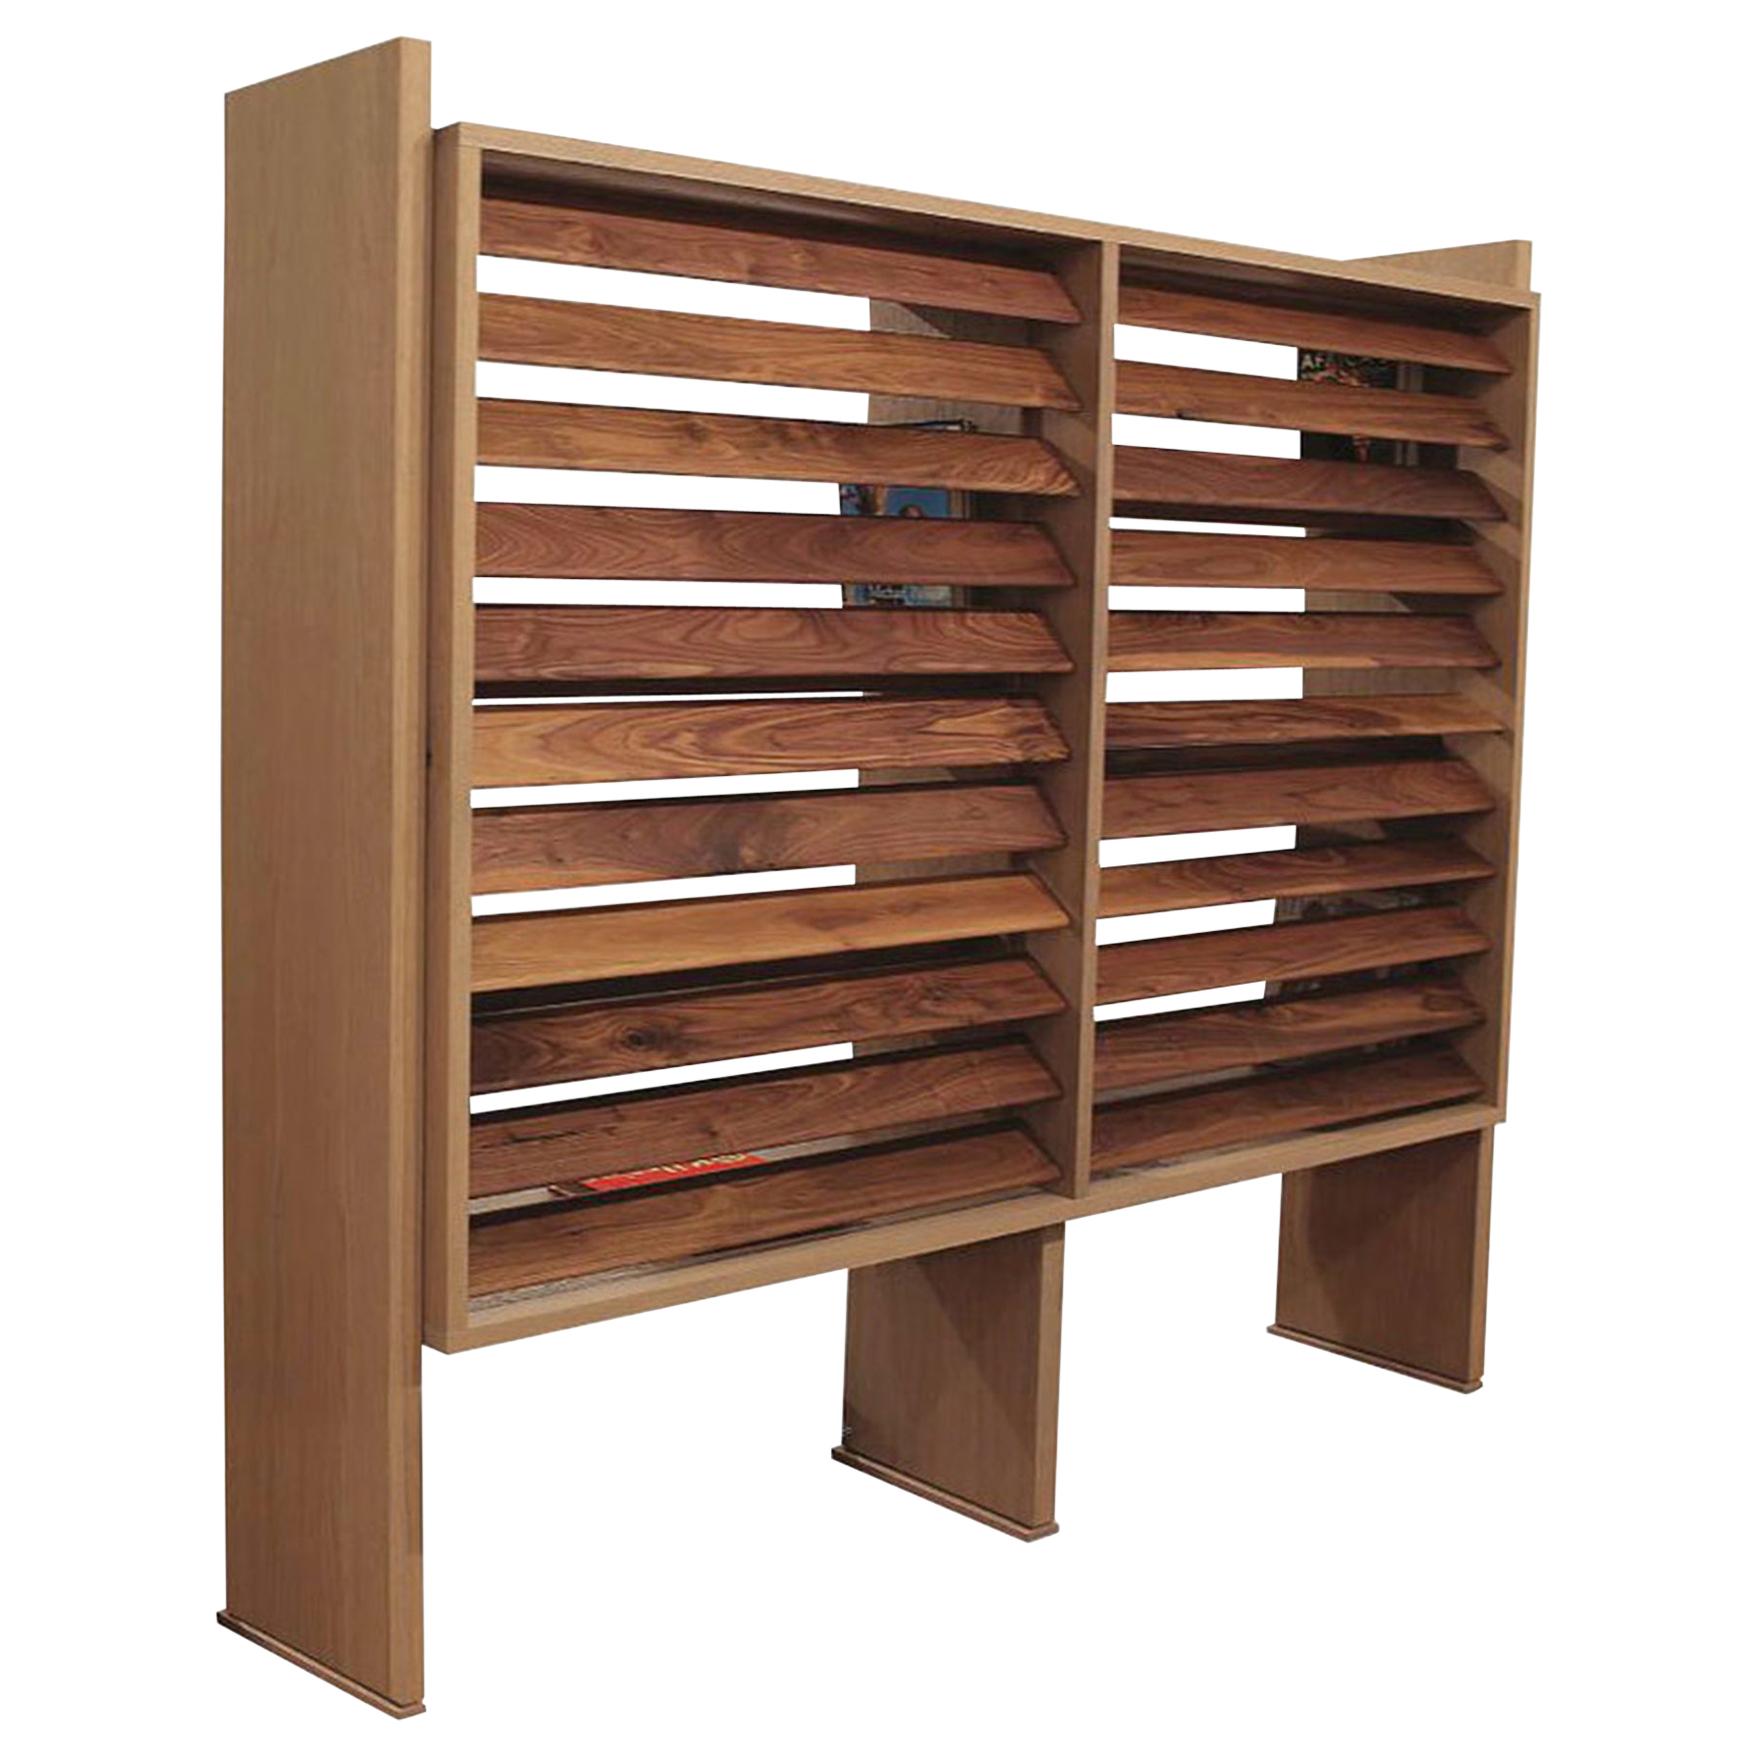 Floating Bookcase/Room Divider in Natural Walnut and Oak with Adjustable Louvers